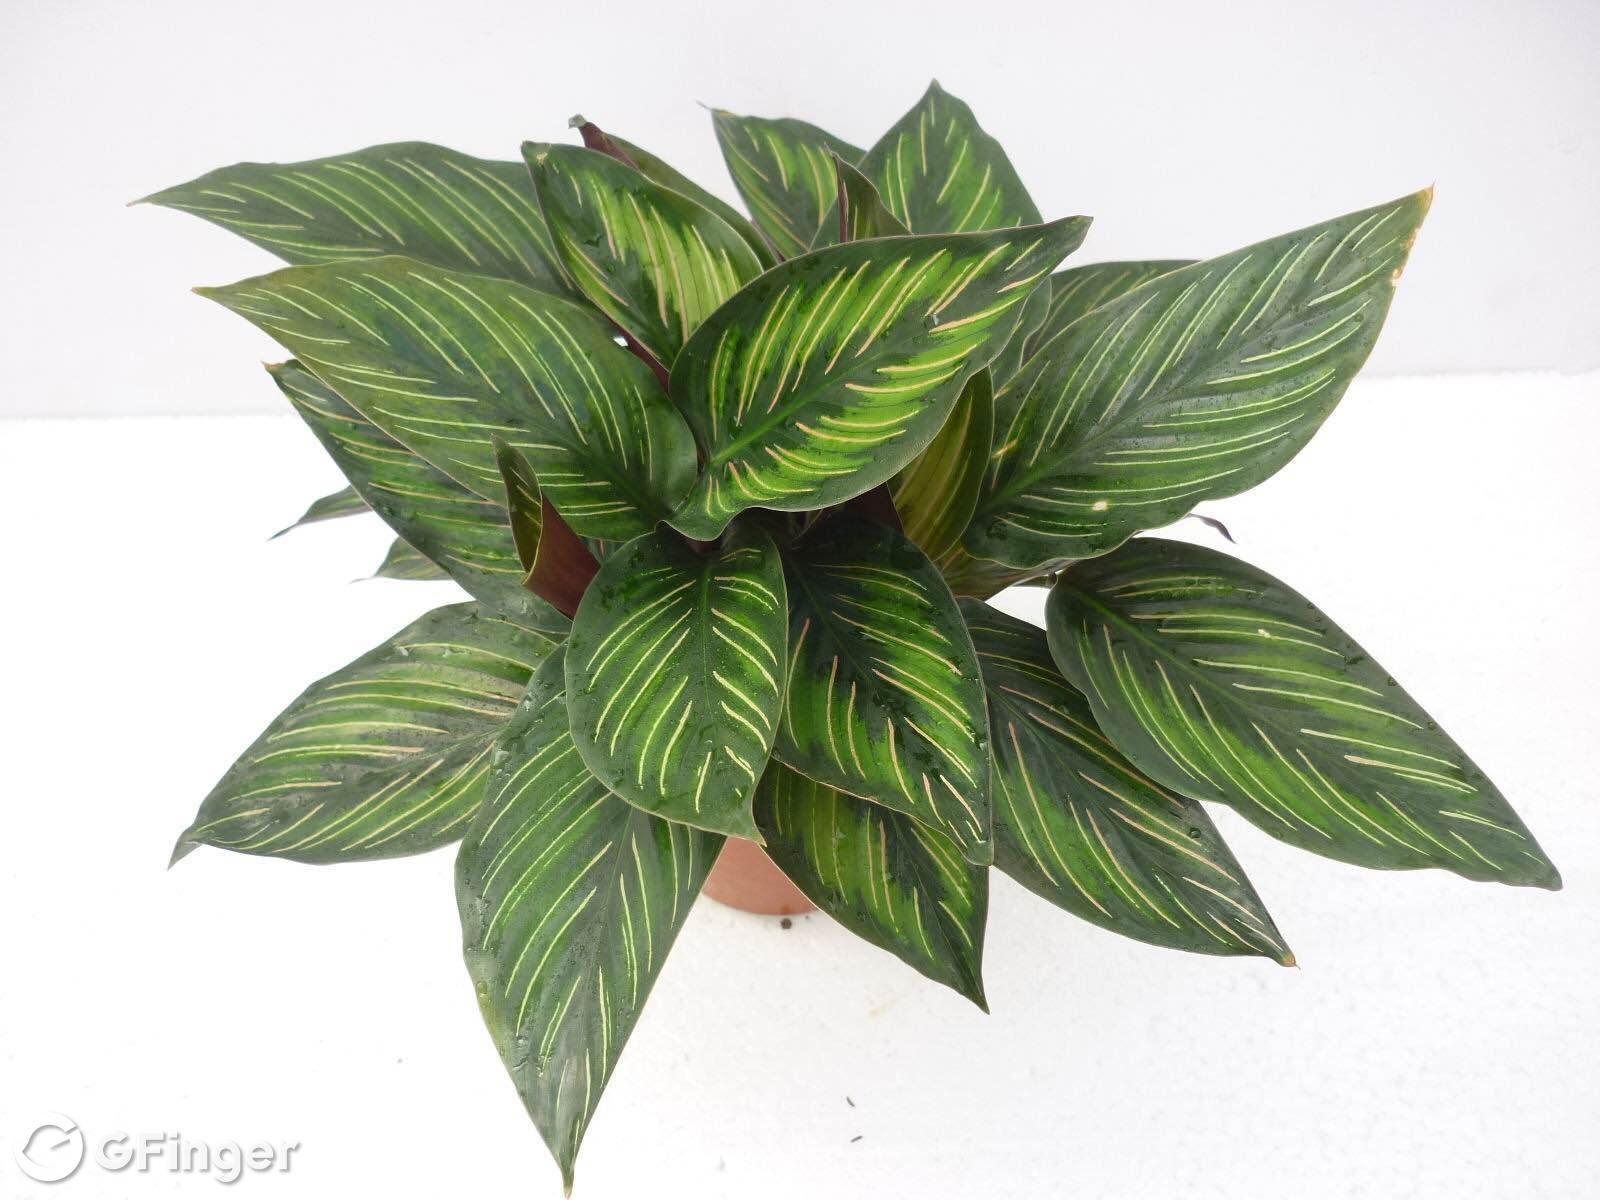 Name: Calathea 'Beauty Star'

Sunlight:  Partial Shade，No direct sunlight

Soil：Likes well lit, warm positions with moist, well-drained soil. 
 
Water：The soil should be moist, but not too much water. It requires higher air humidity. Especially when new leaves are growing. Water should always be sprayed onto the plant. 
 
Temperature: 20-30 ℃ is suitable for growth。Higher than 35 ℃ or below 7 ℃, the plant will stop growing. The winter temperature must not less than 13 ℃.

Fertilizer：Apply a slow release fertilizer regularly.

Better place：Perfect for indoor pot plants or in a shady spot on the patio.